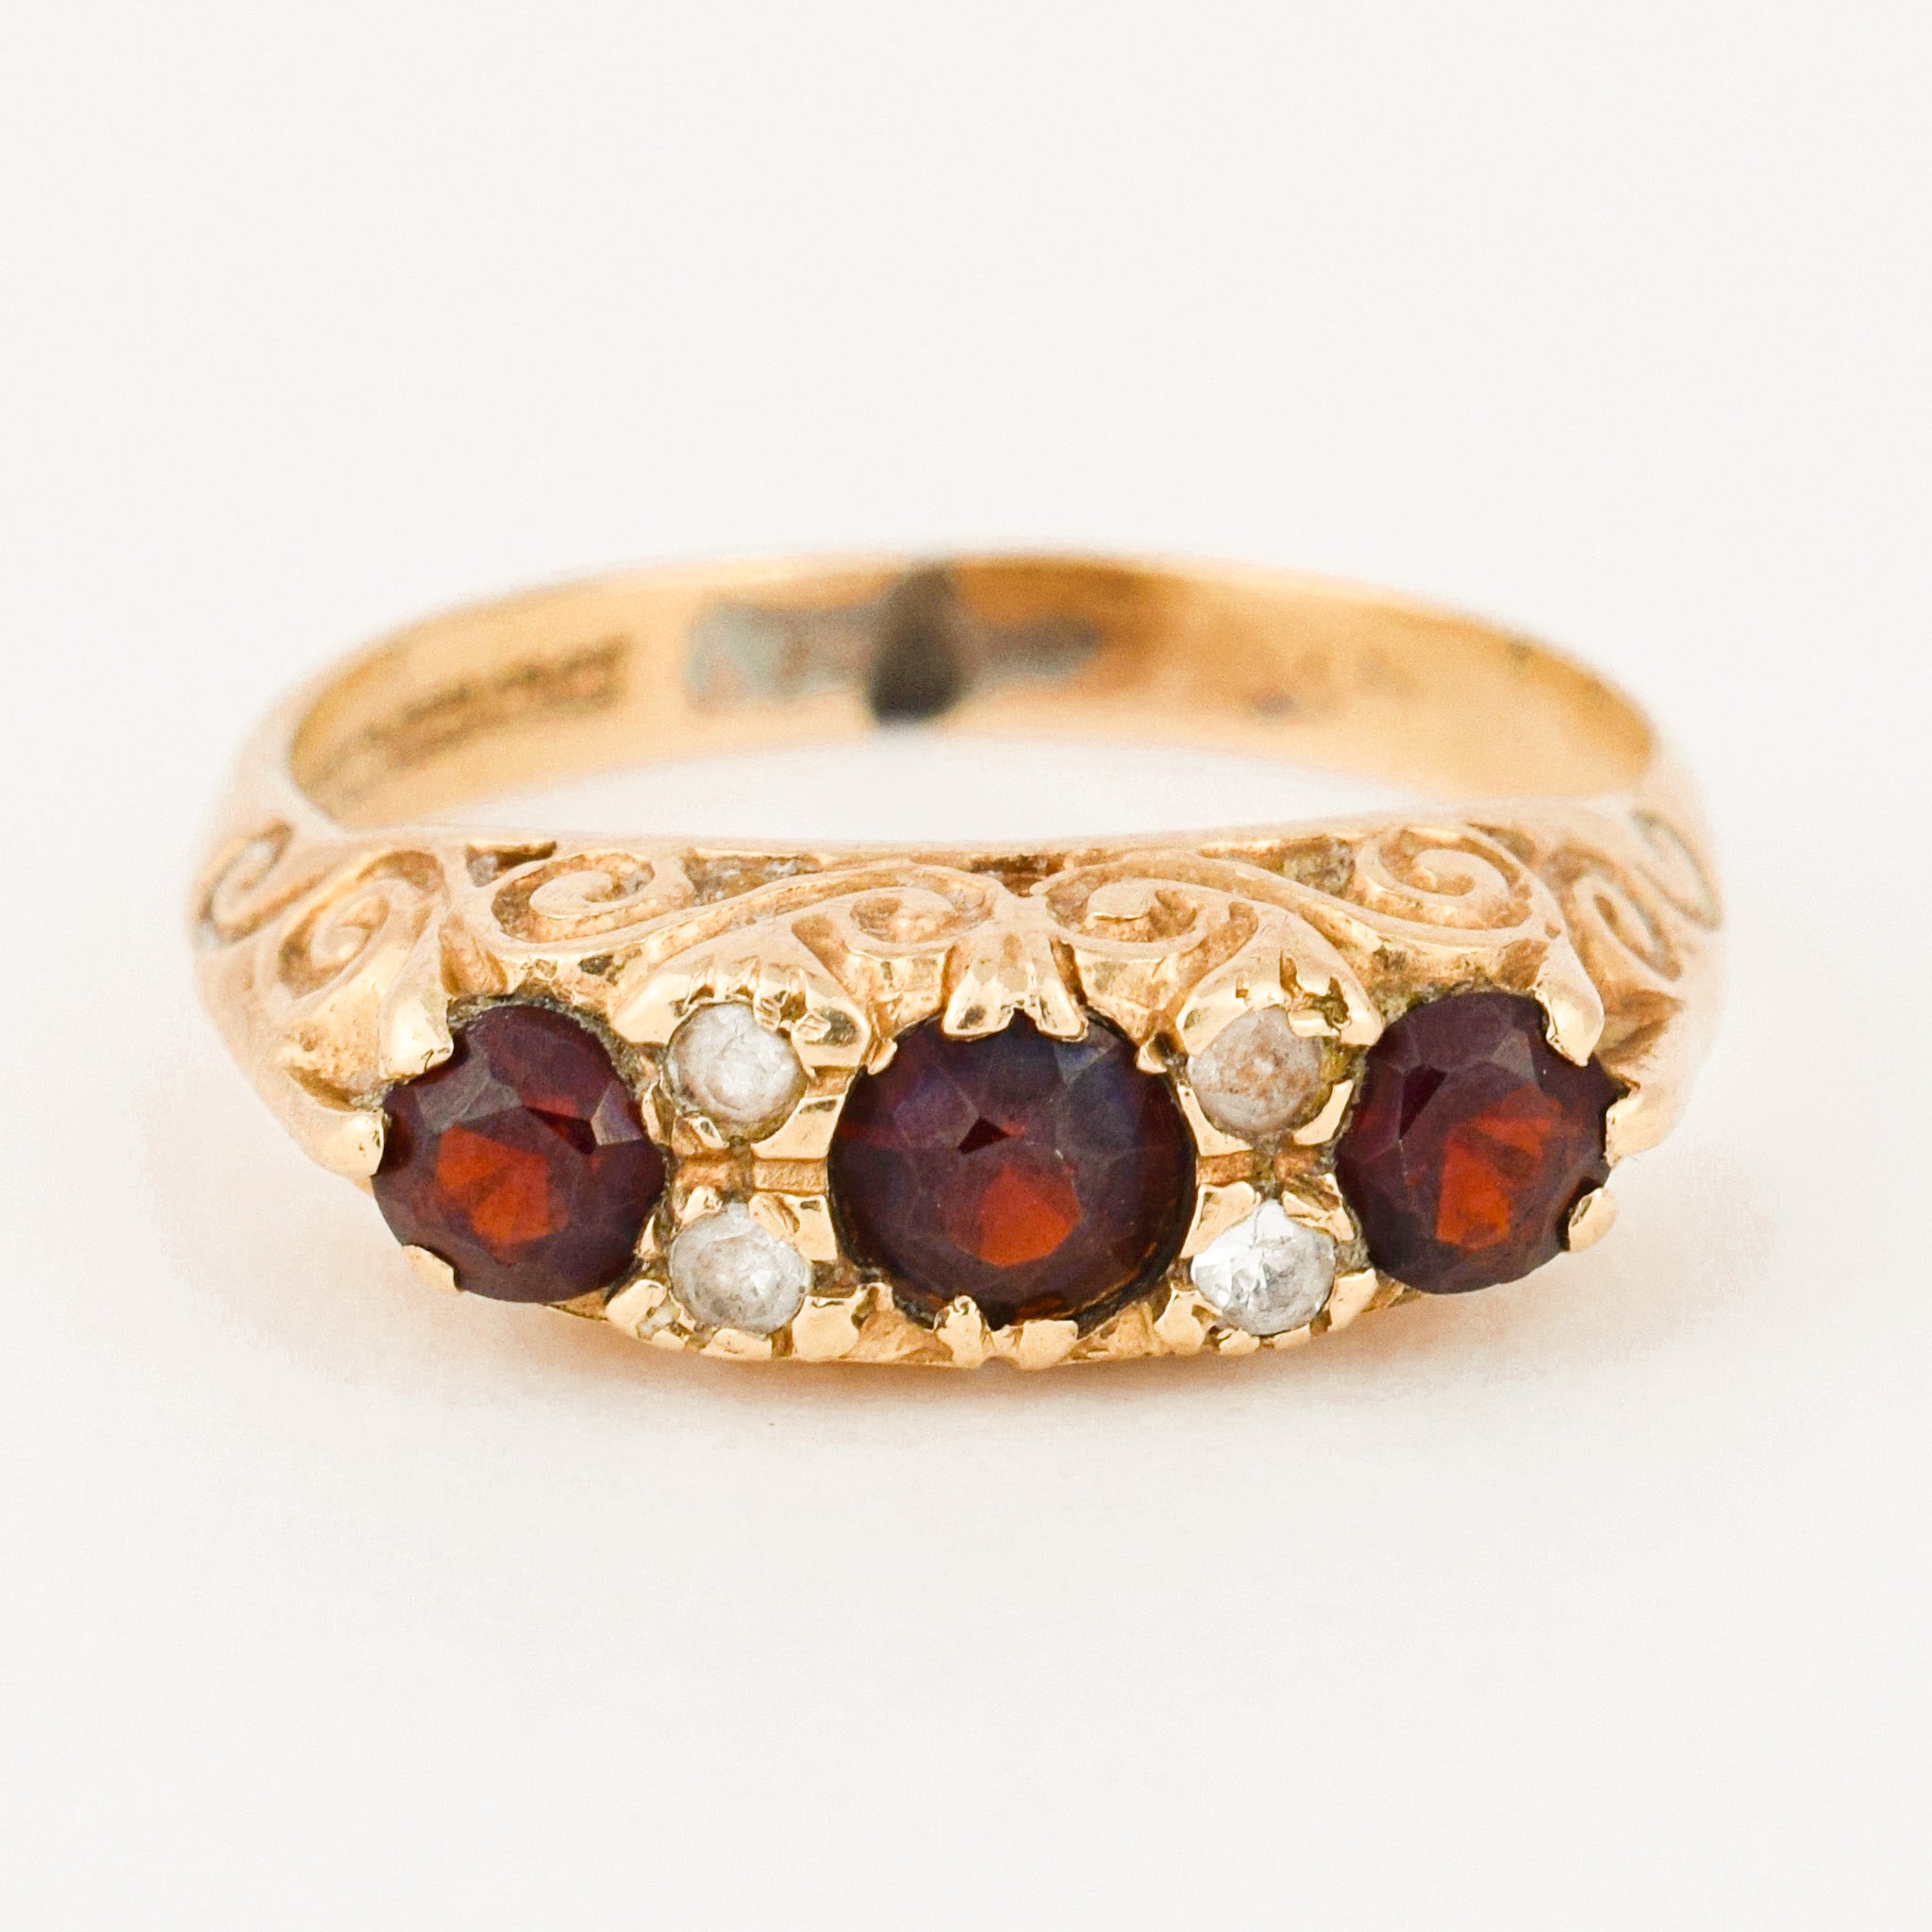 Antique Garnet and Cubic Zirconia Trilogy Ring